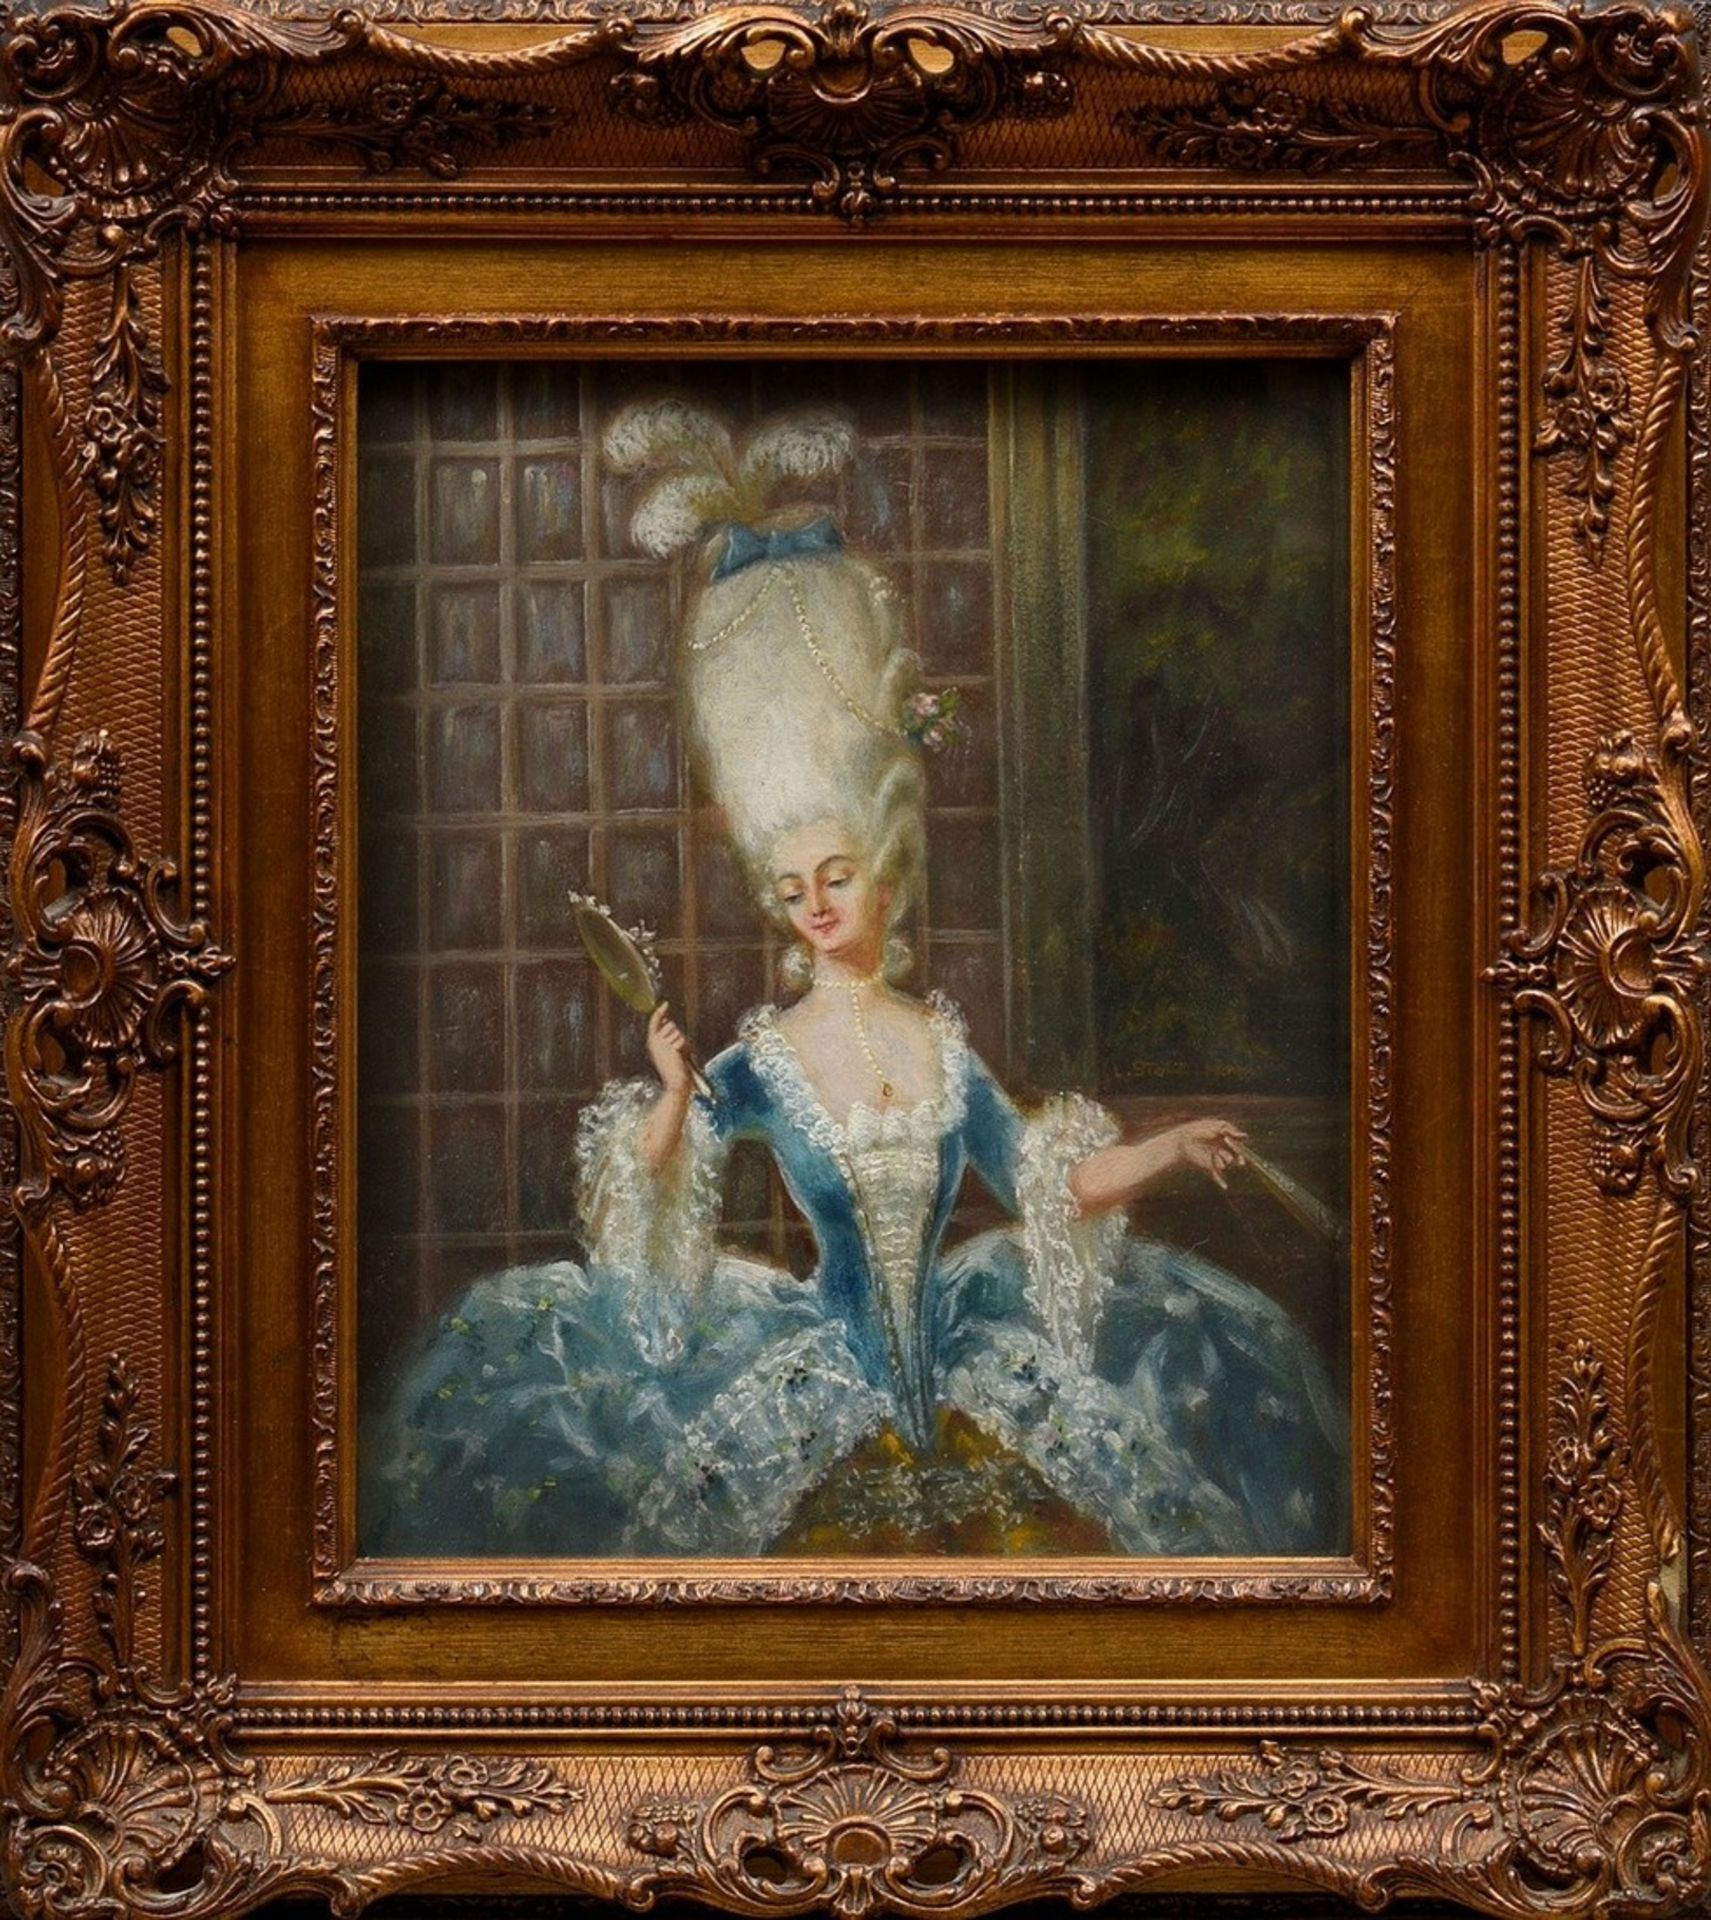 Unknown artist of the late 19th c. (L. Stolz?) "Rococo Lady: La Parure", oil/cardboard, r. sign./in - Image 2 of 4